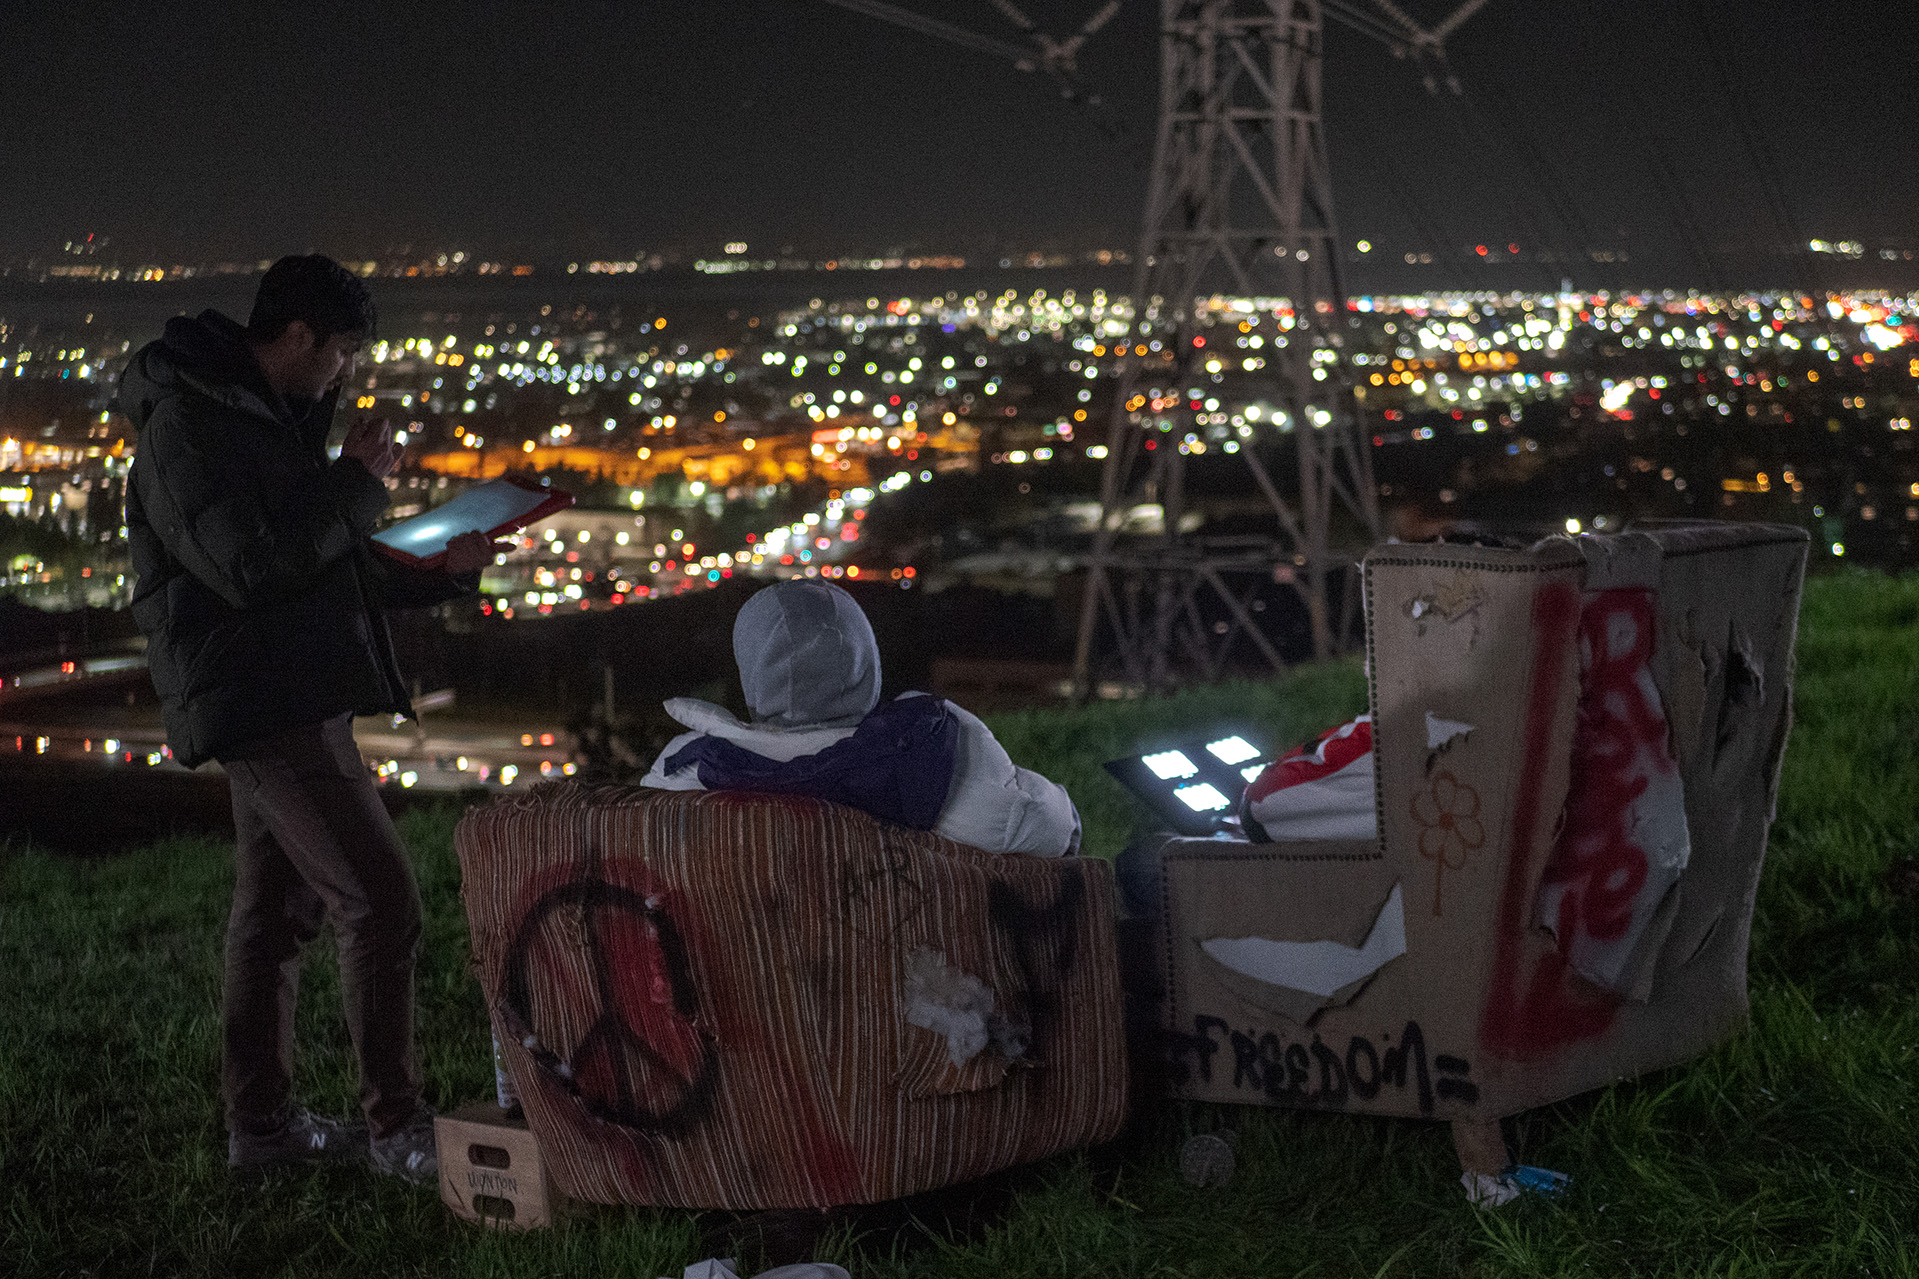 Three young men on ipads, two graffitied chairs, above a city scape at night